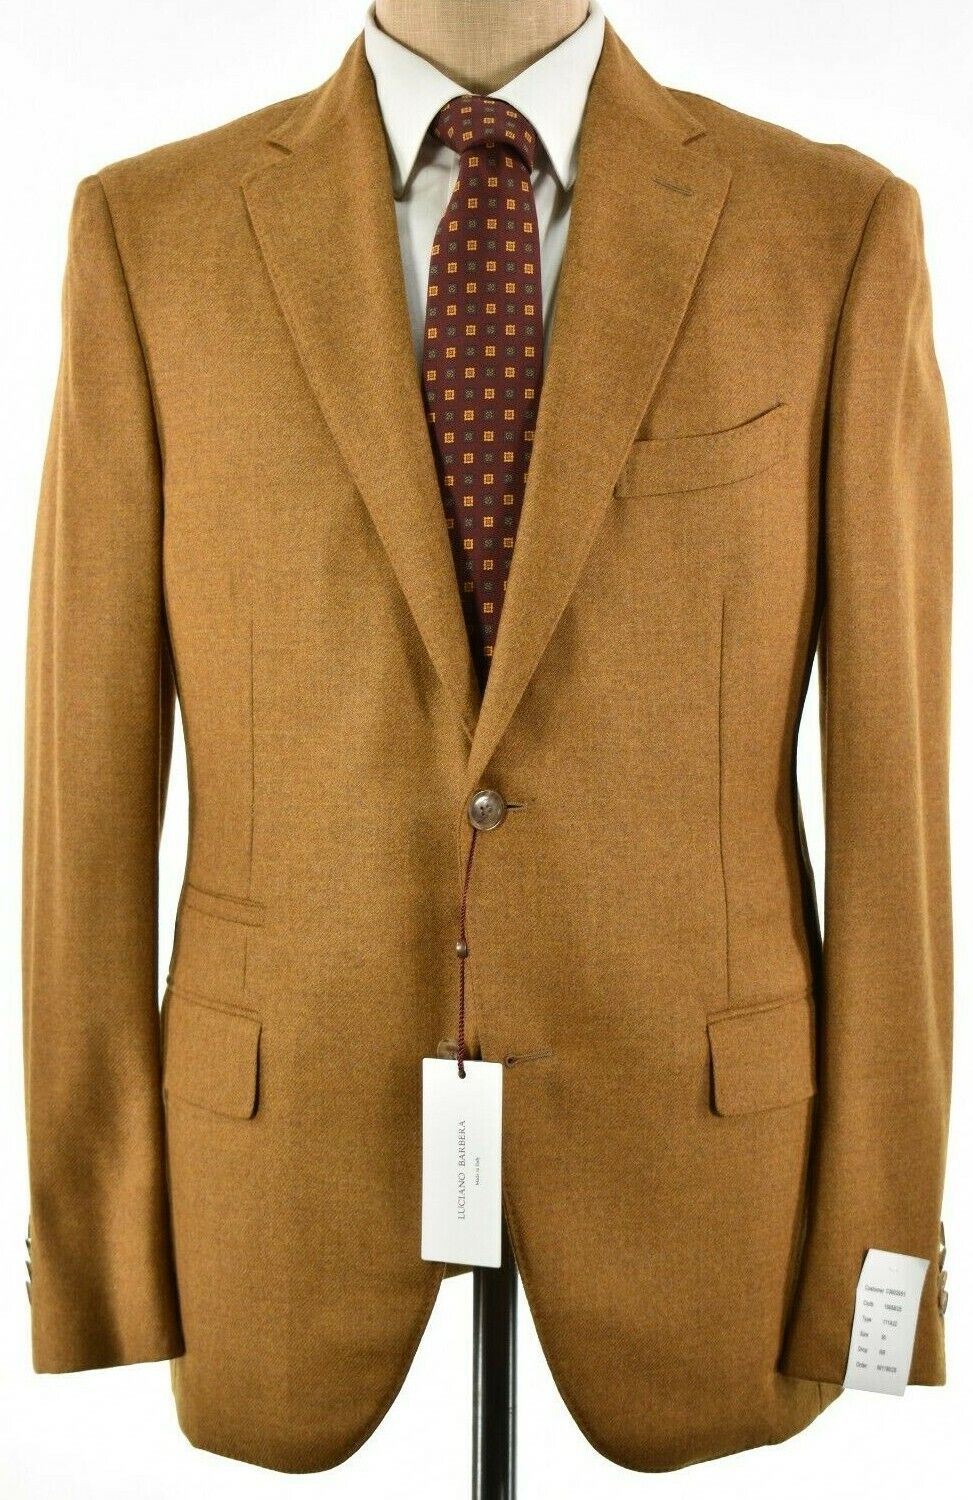 Pre-owned Luciano Barbera Sport Coat Size 52 42r Us In Golden Tan Wool/cashmere